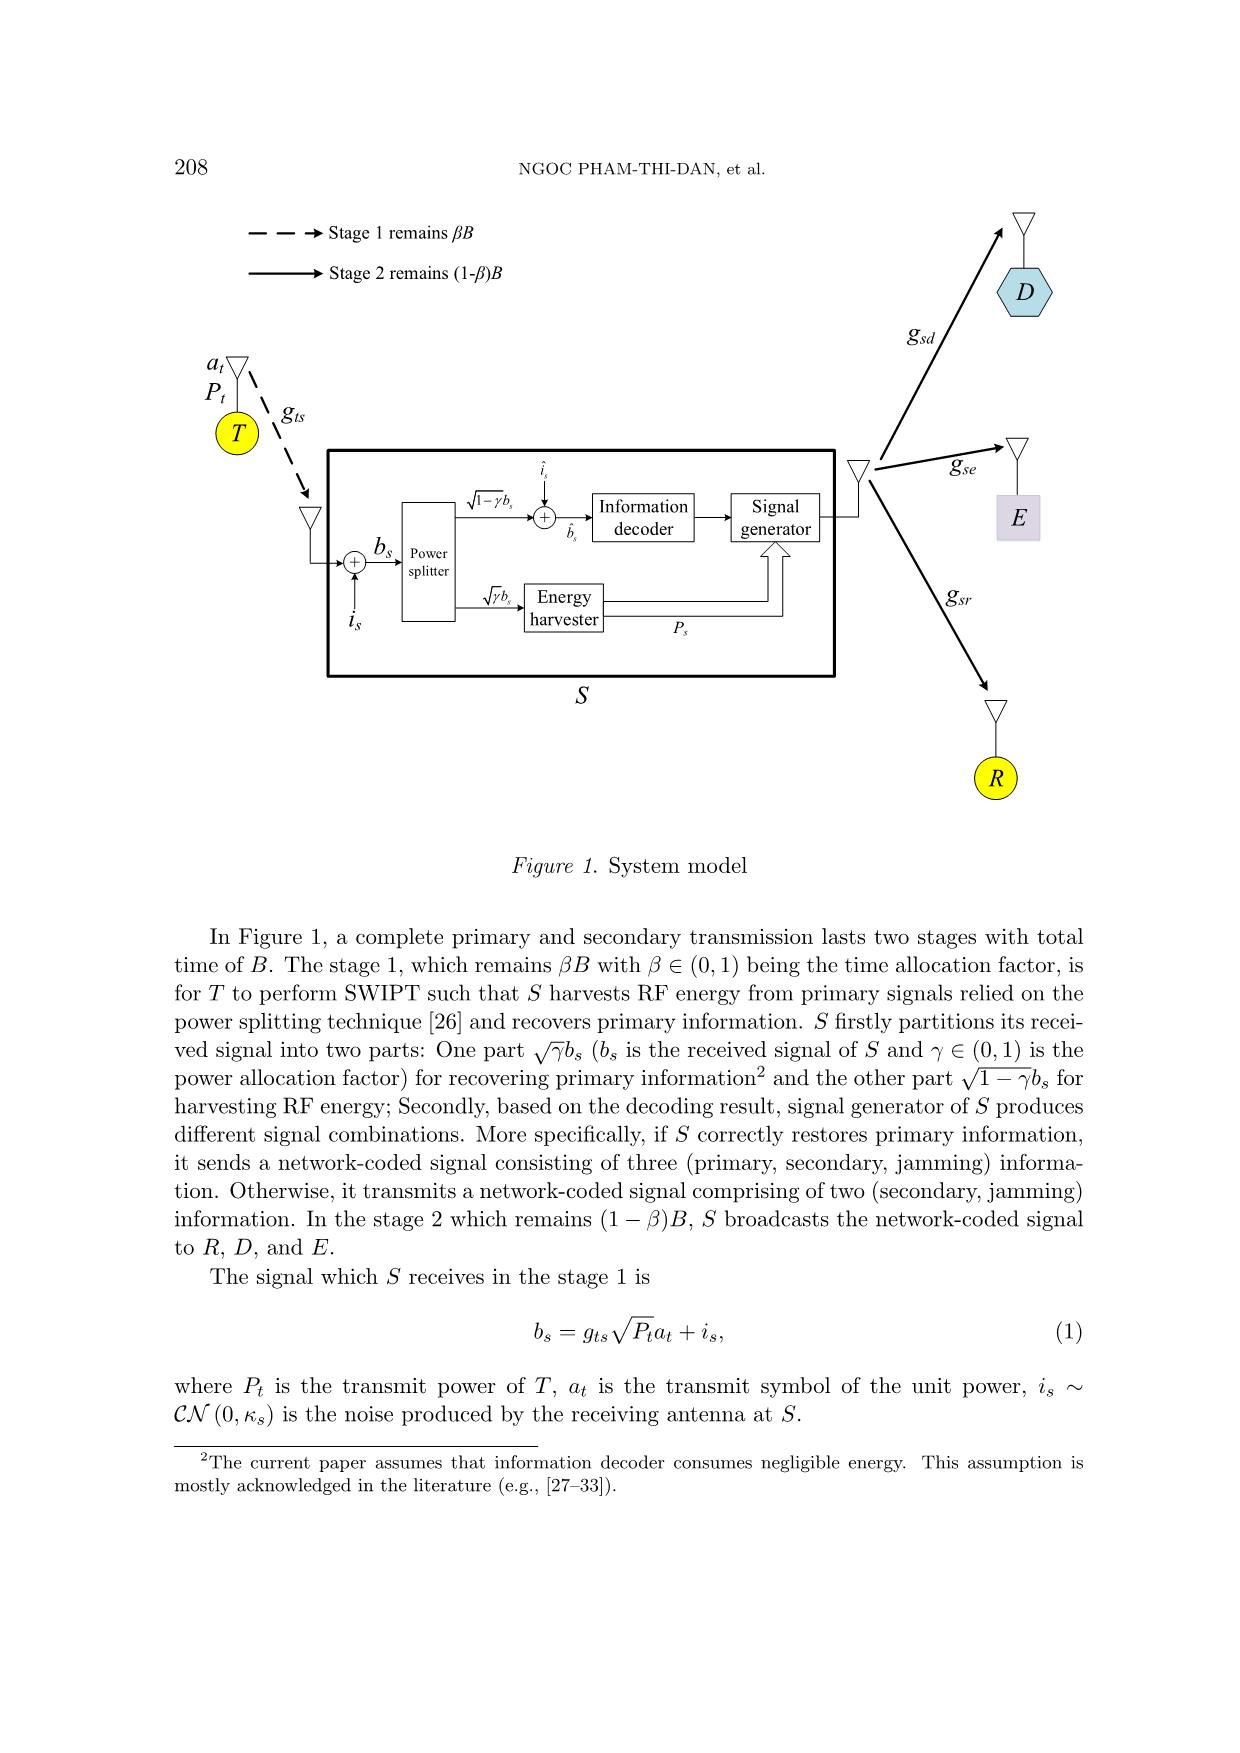 Security capability analysis of cognitive radio network with secondary user capable of jamming and self-powering trang 4